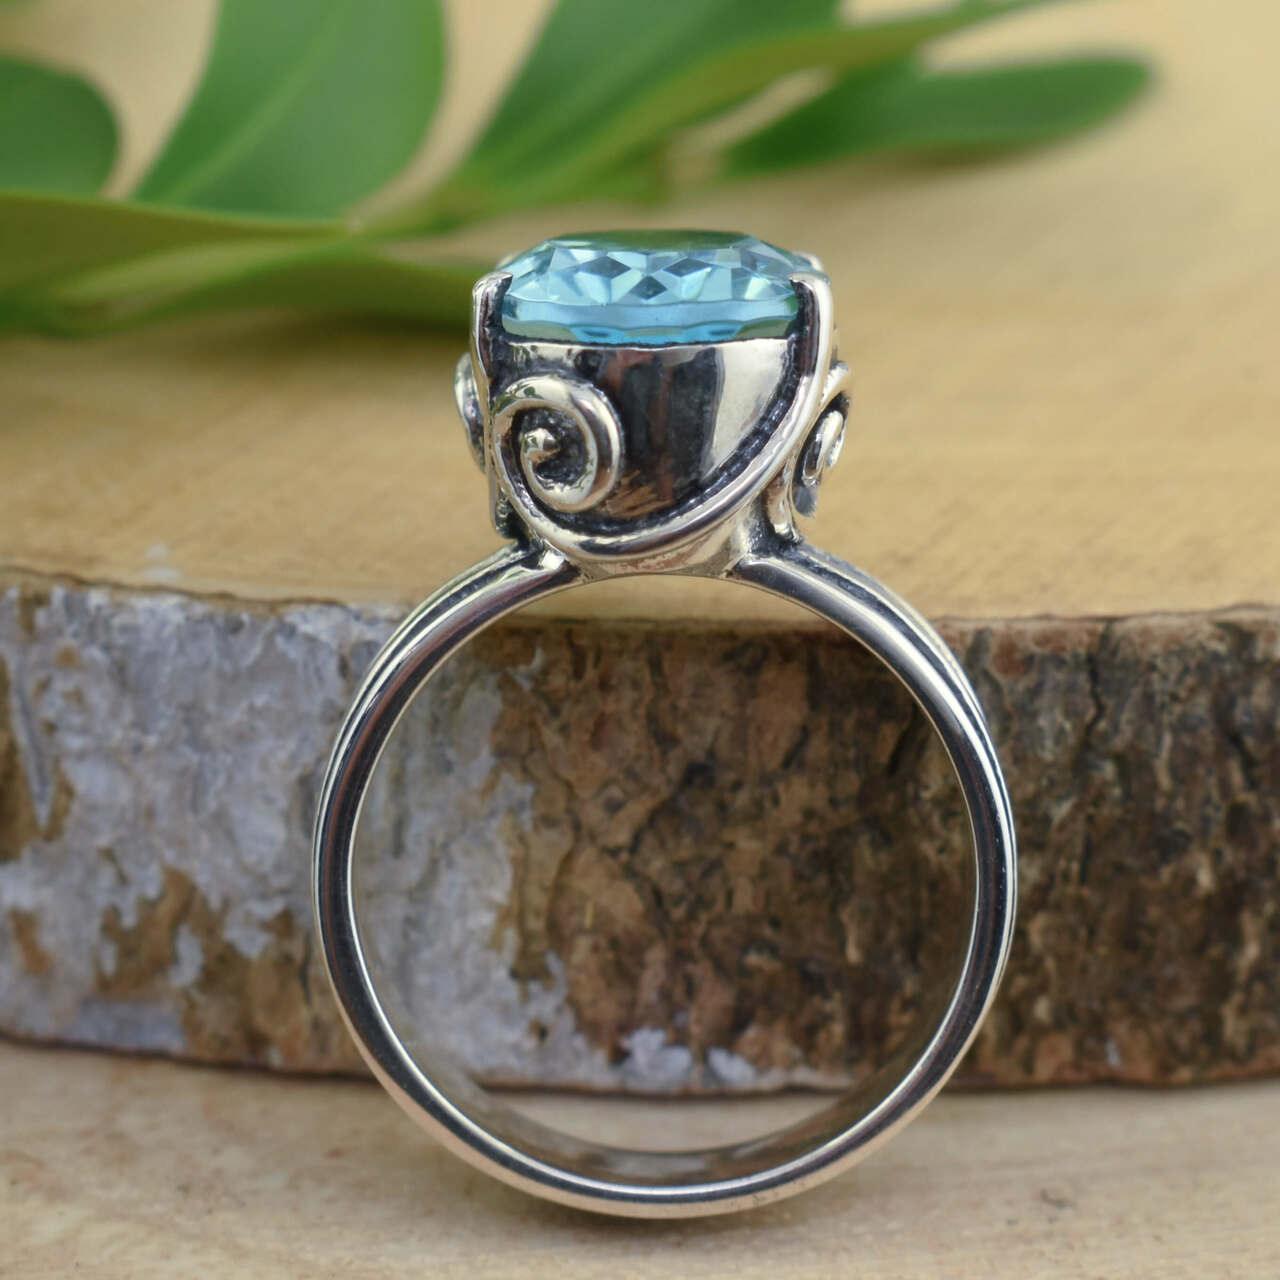 Handcrafted sterling silver Bahama Breeze Ring